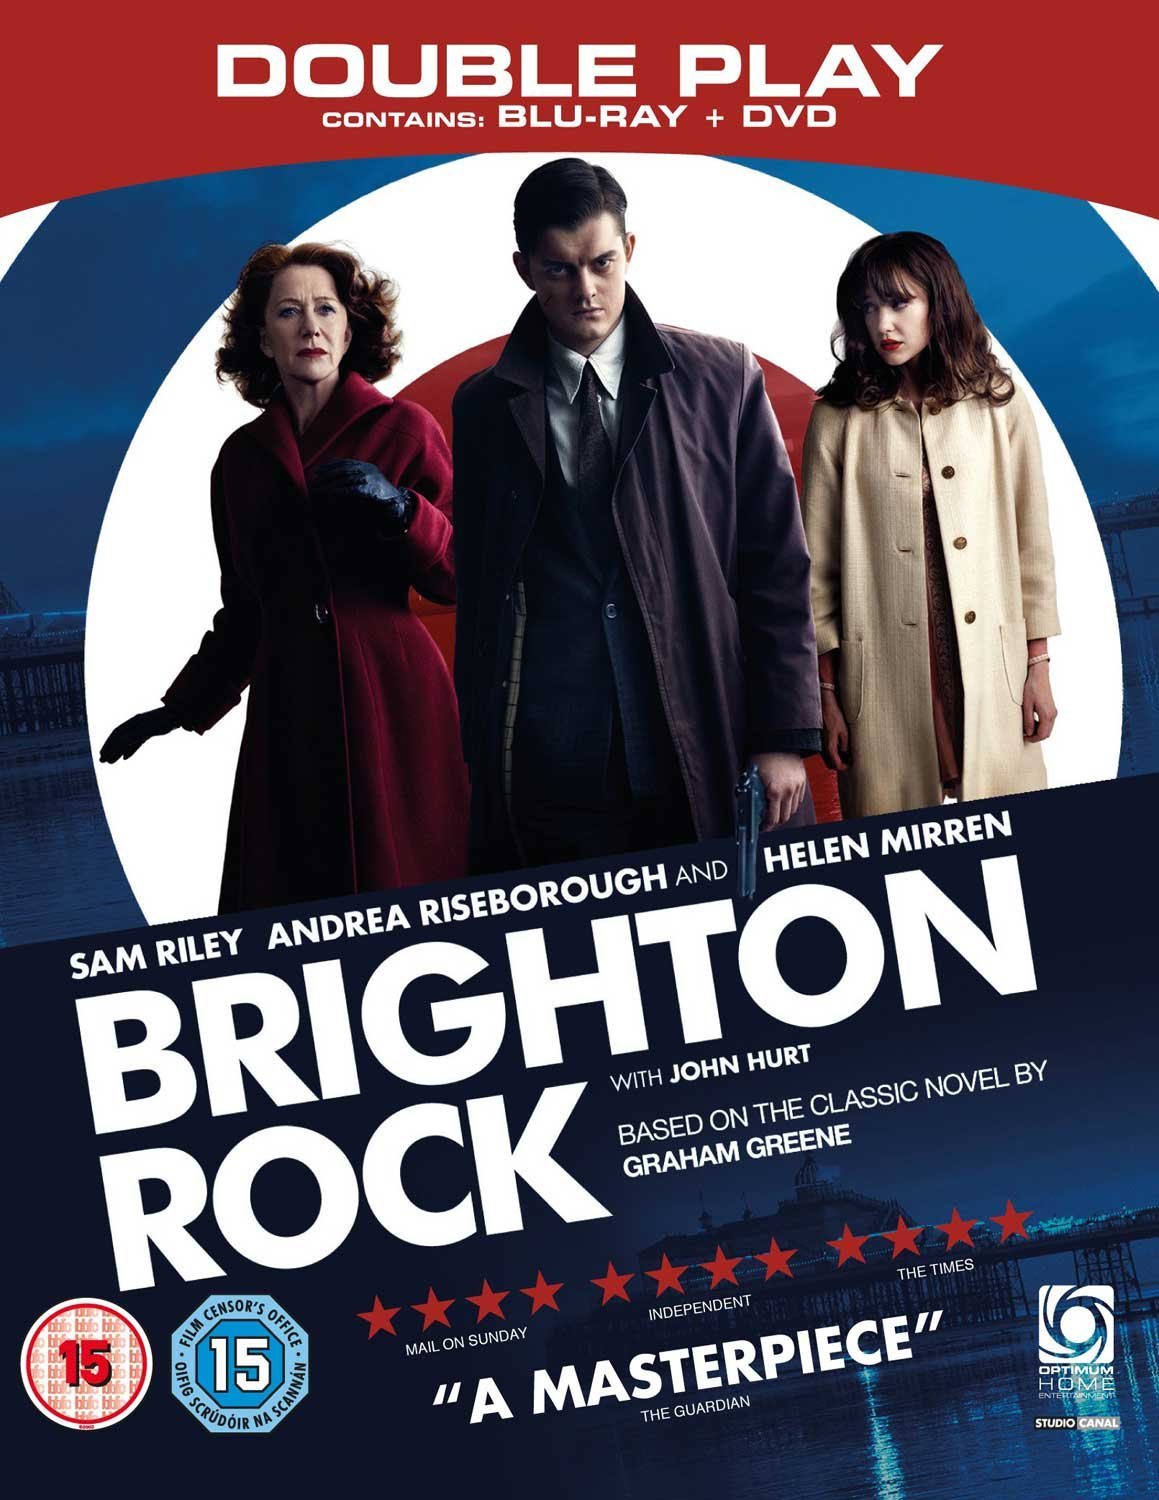 Brighton Rock - Double Play (DVD and Blu-ray)